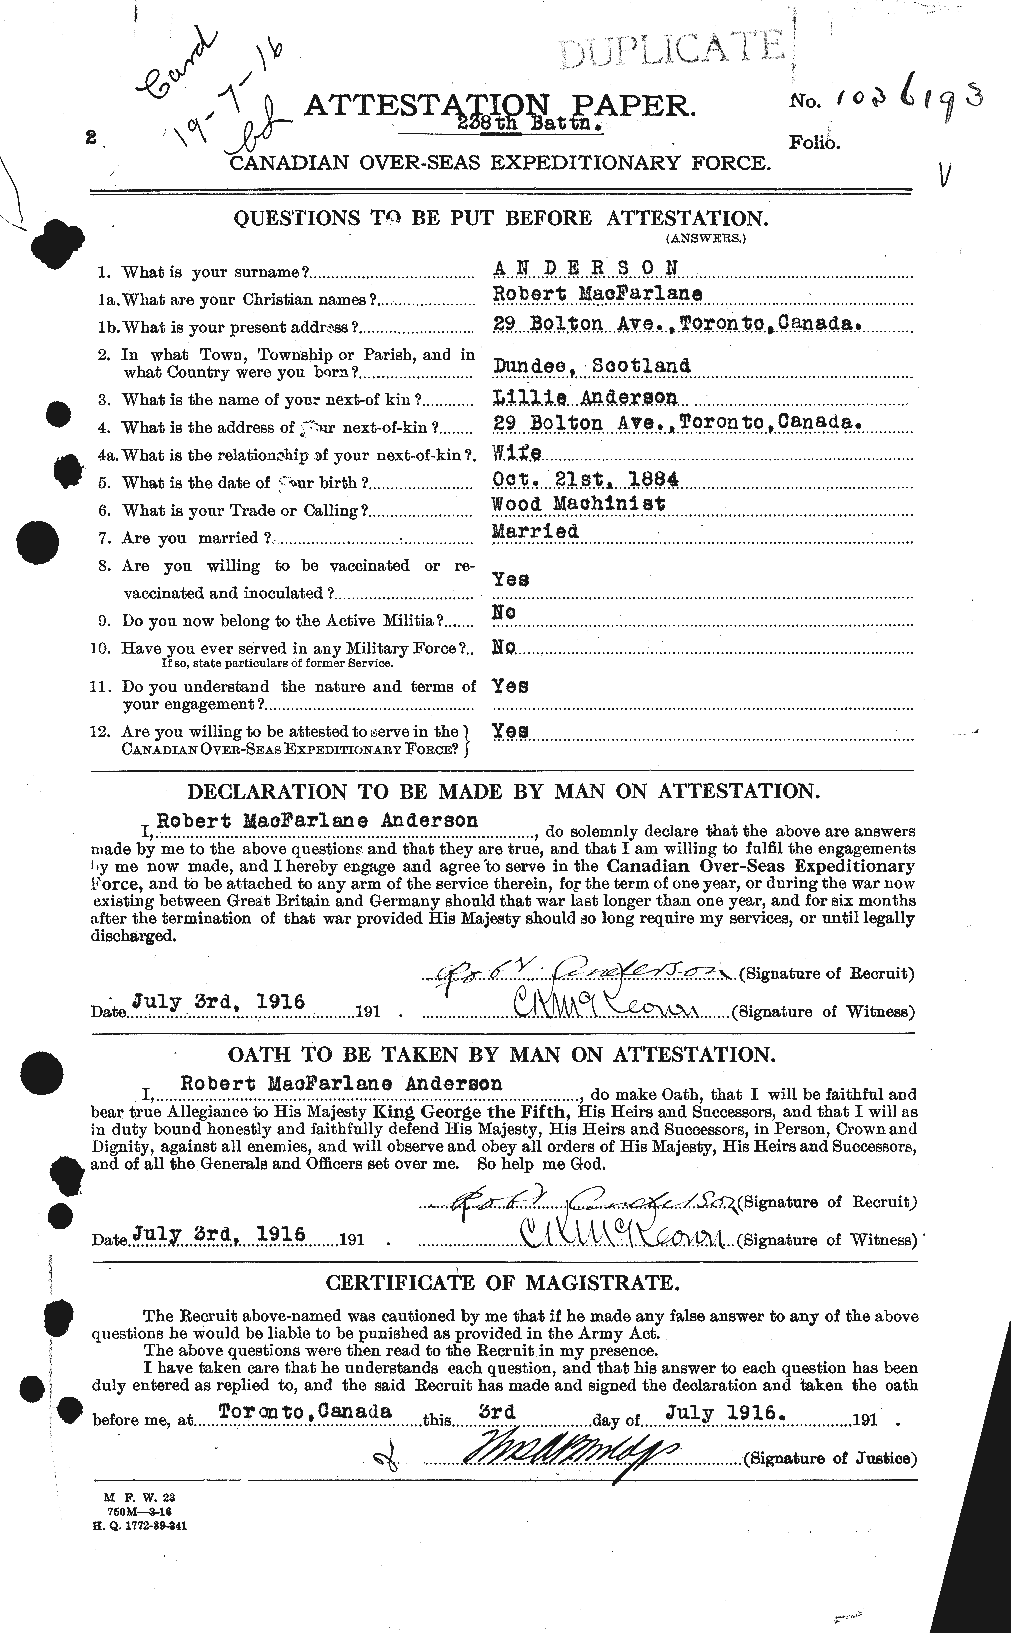 Personnel Records of the First World War - CEF 207235a